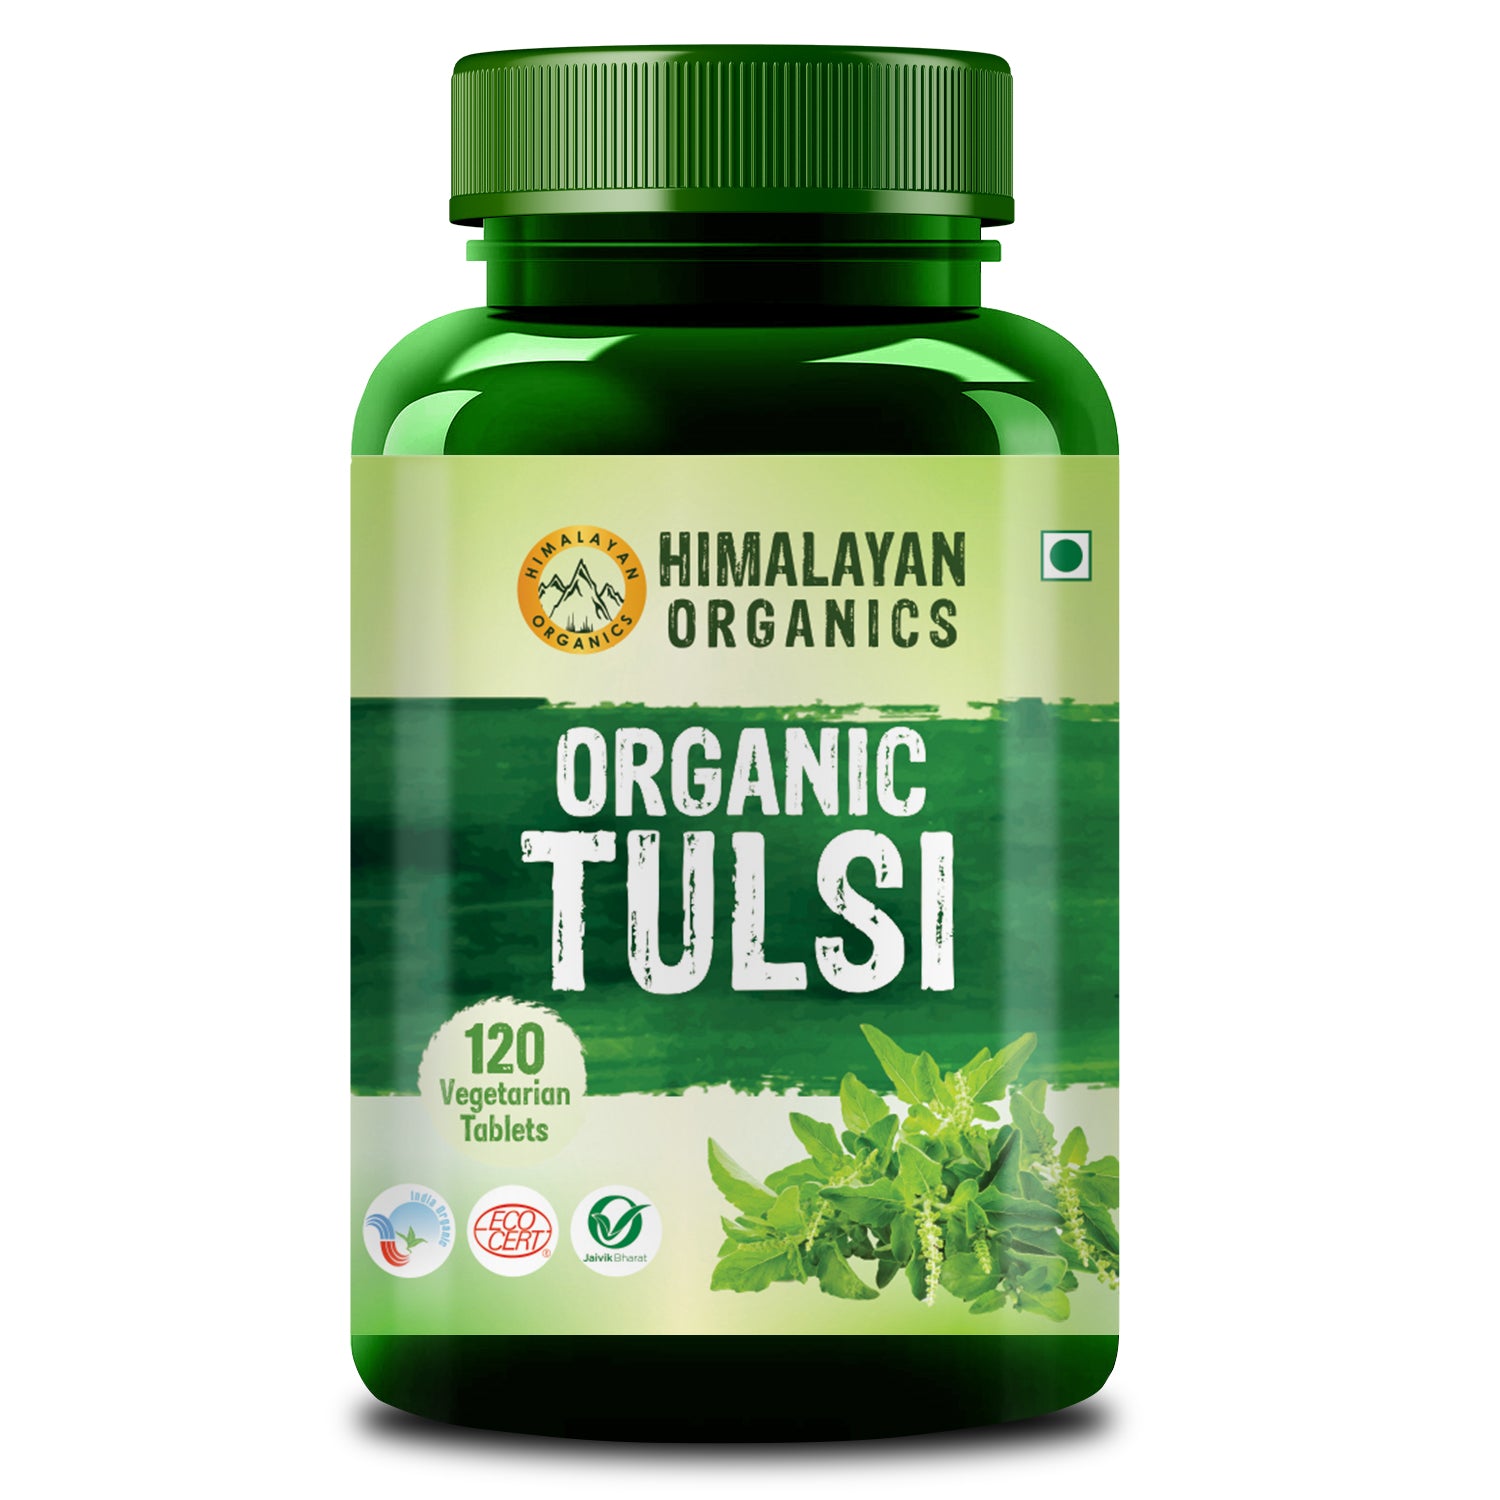 Himalayan Organics Organic Tulsi Tablets | Holy Basil | Provides relief in Cough & Cold | Natural Immunity Booster (120 Tablets)